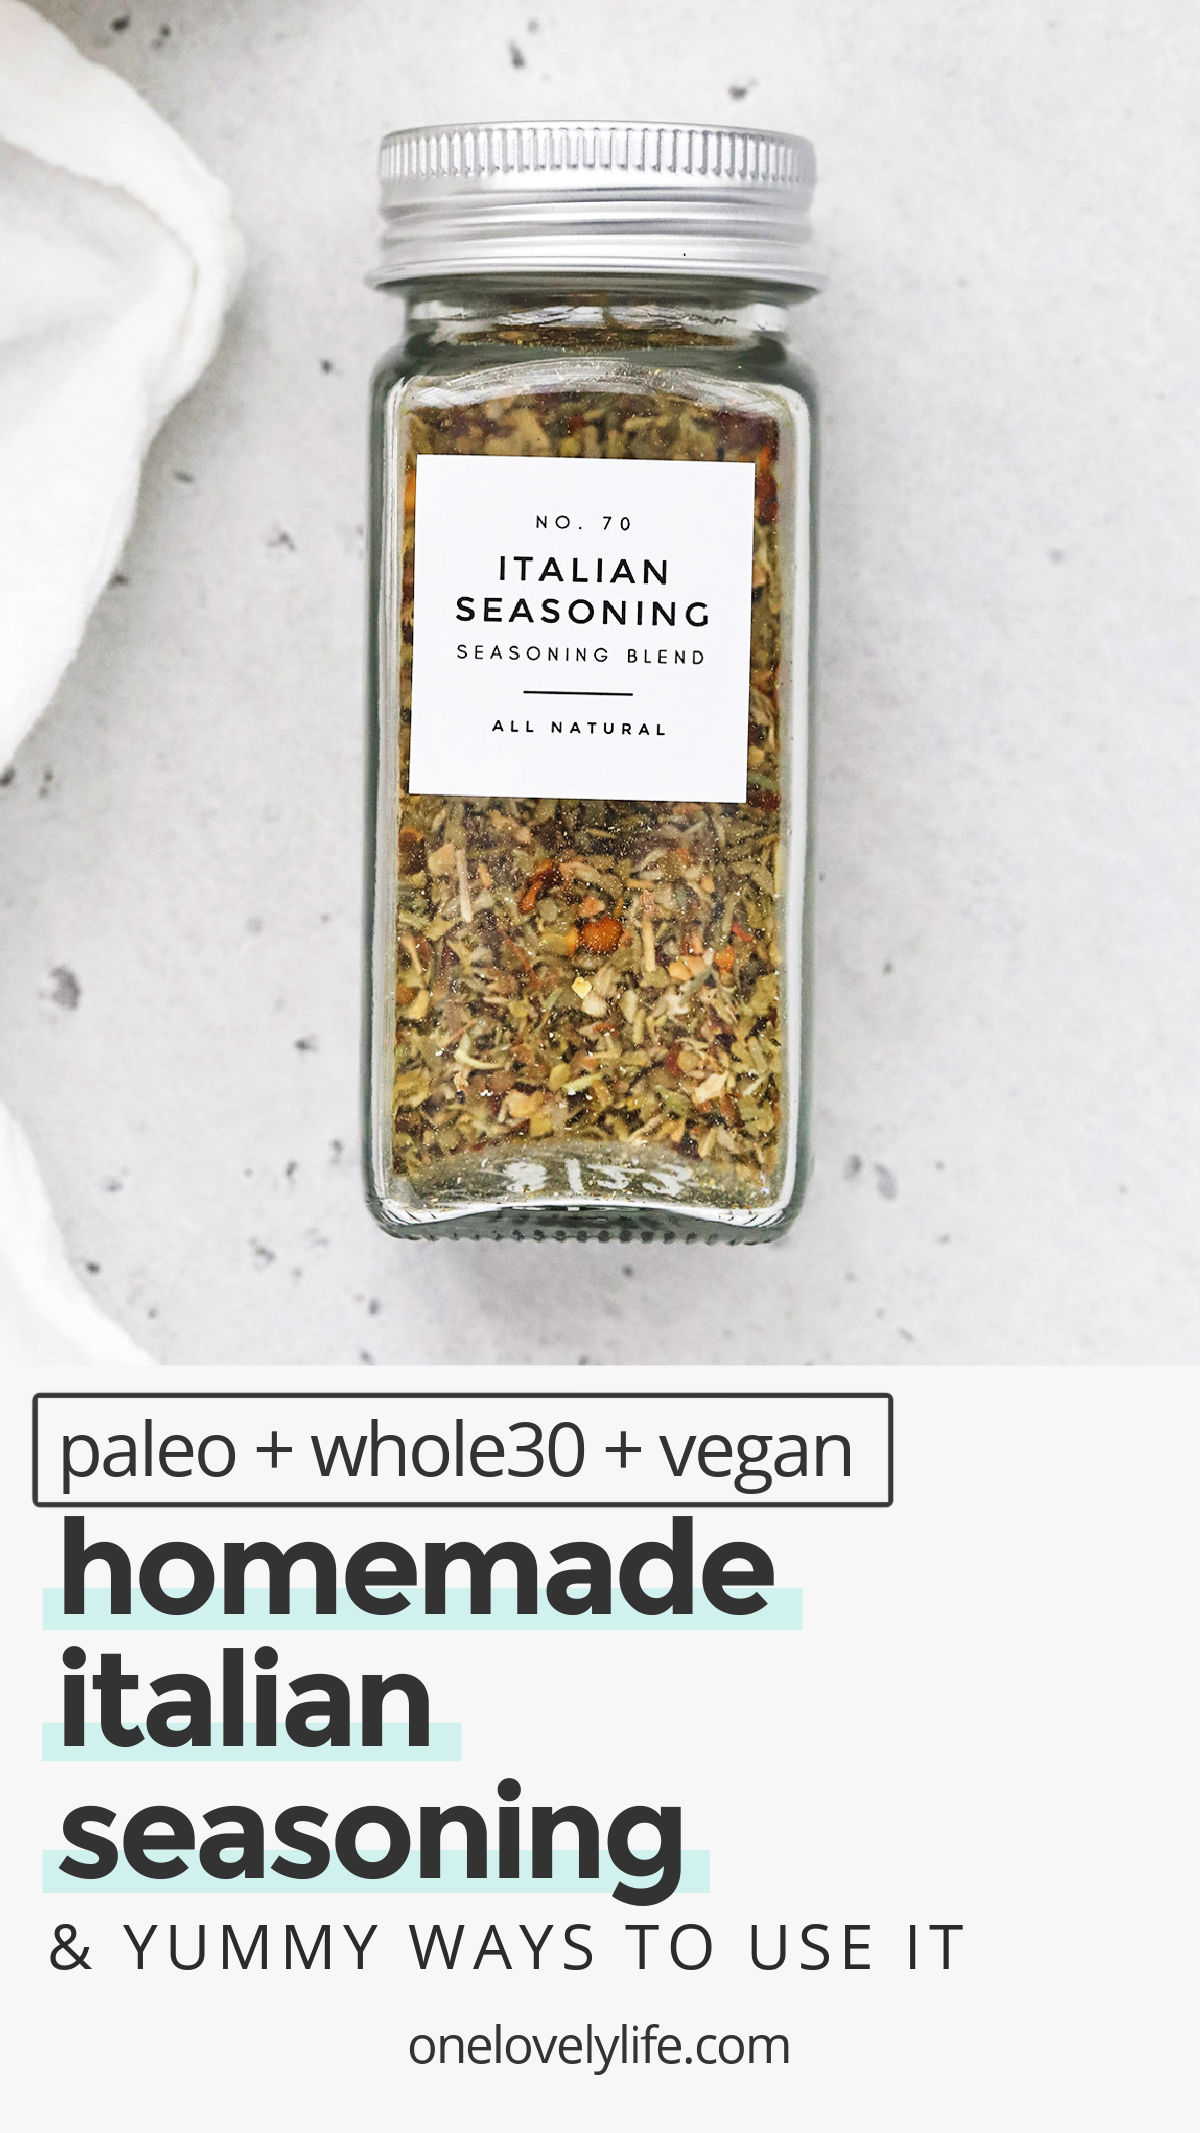 Homemade Italian Seasoning Mix - This easy Italian herbs blend is SO much better than store-bought! Don't miss all our favorite ways to use it below! // Italian herb seasoning // Italian spices // italian herb mix // homemade spice mix // homemade spice blend // budget recipe // paleo seasoning // whole30 seasoning // vegetable seasoning // pasta sauce seasoning // italian dressing seasoning //